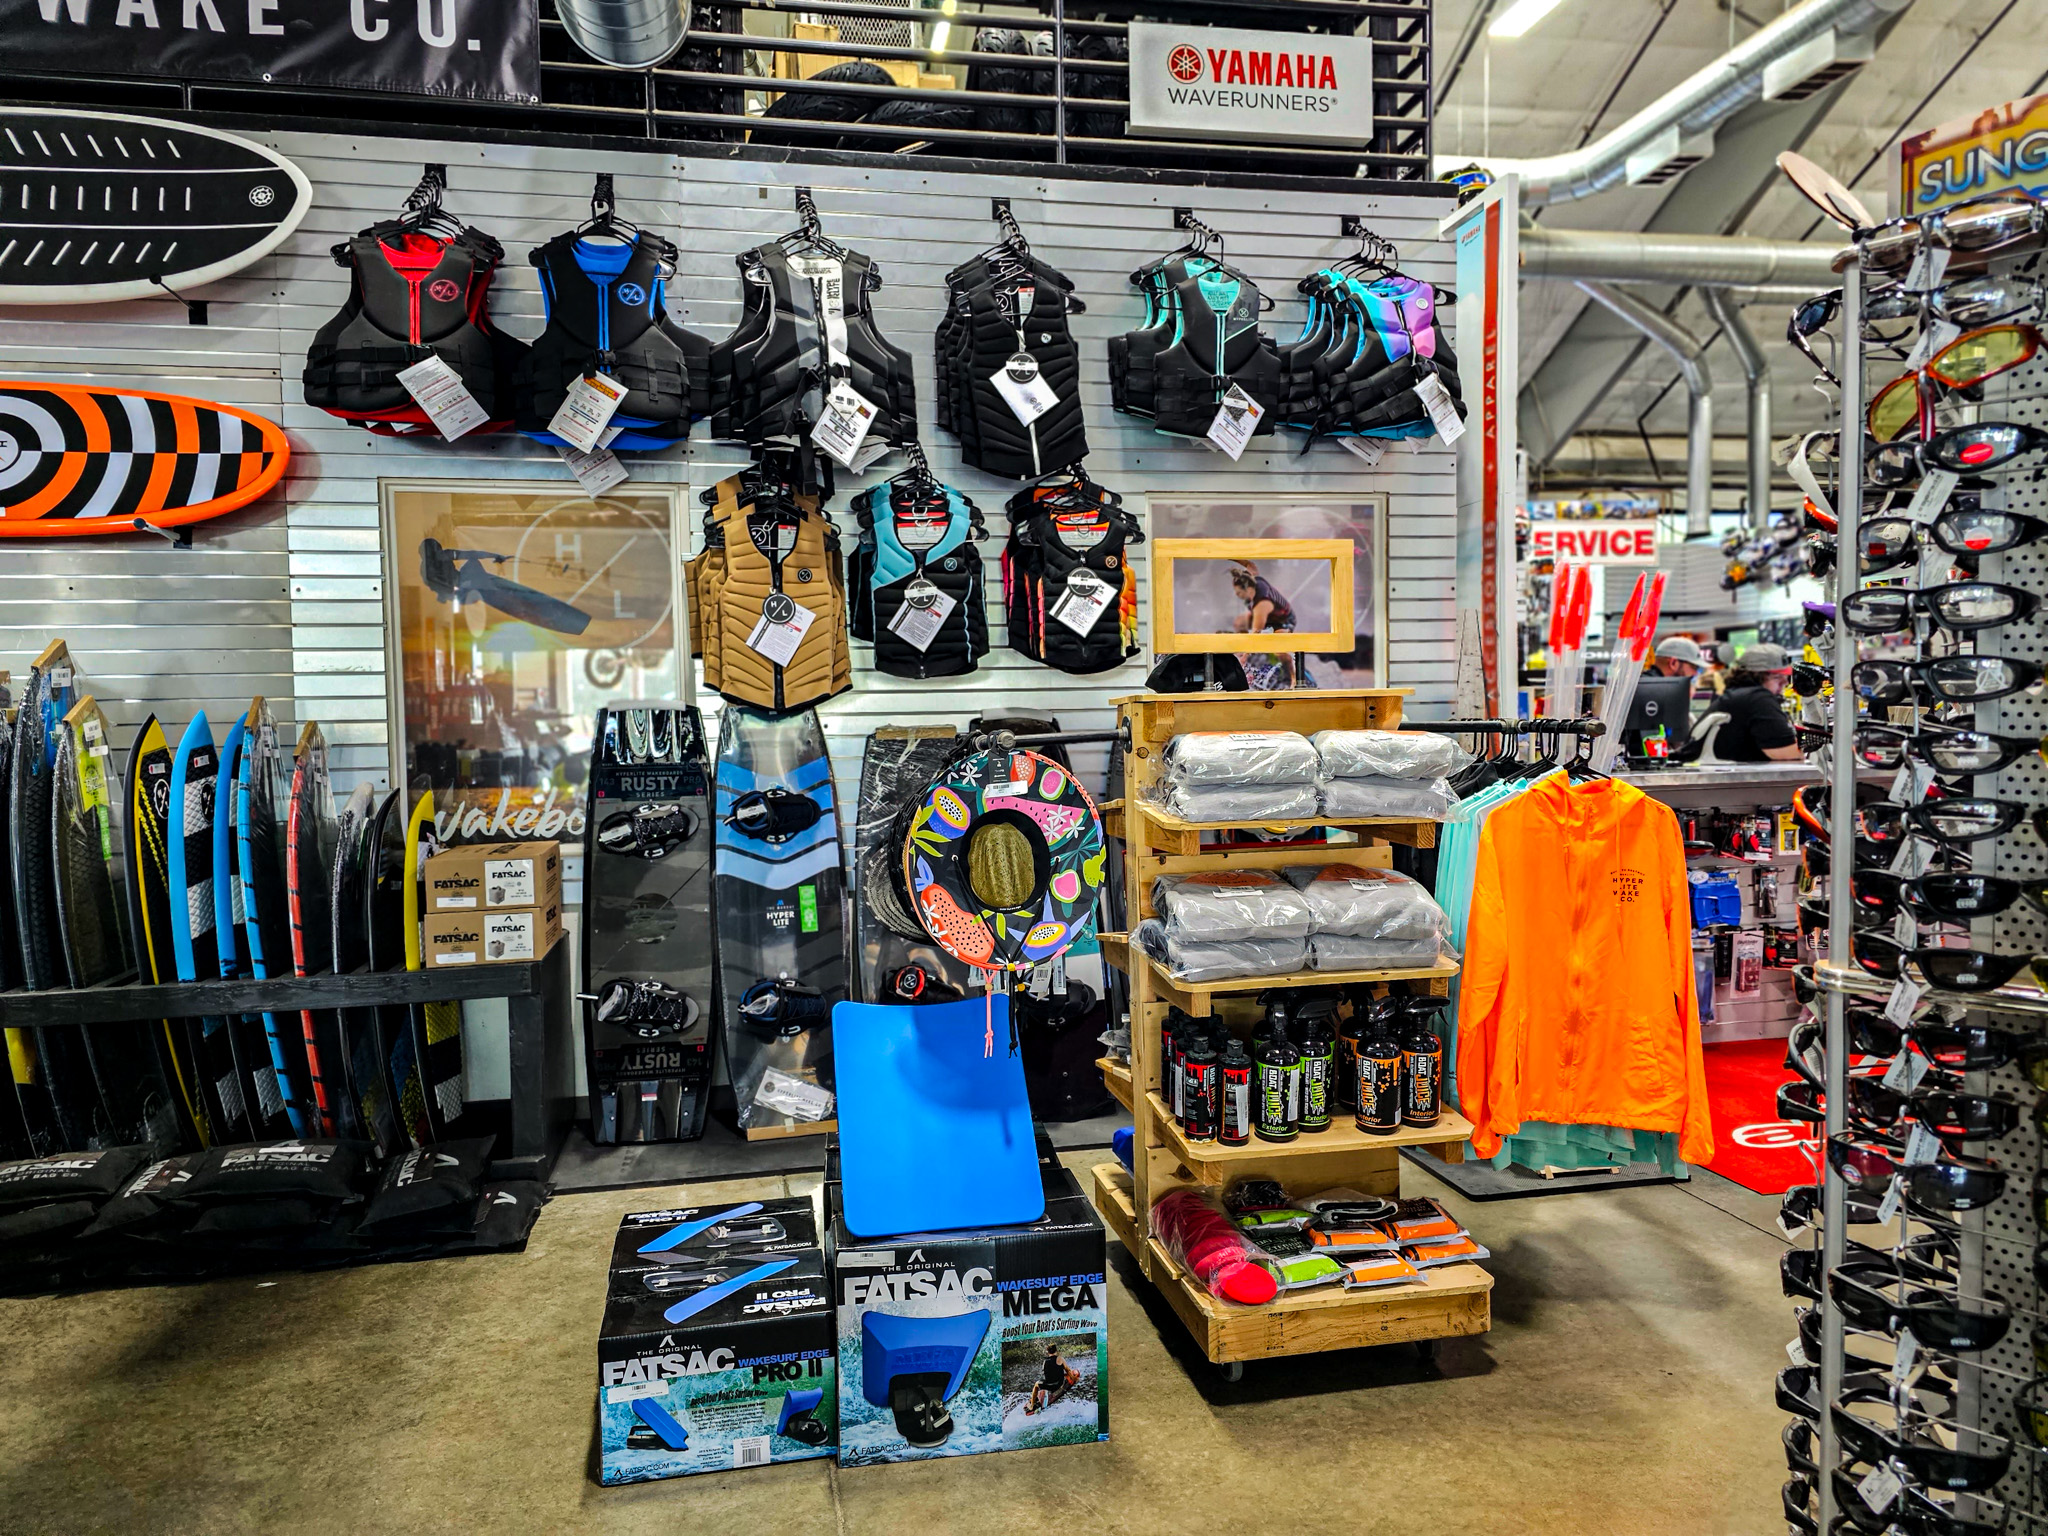 Wall of boating accessories including life jackets, wake boards, surf boards, sunglasses, fatsac …